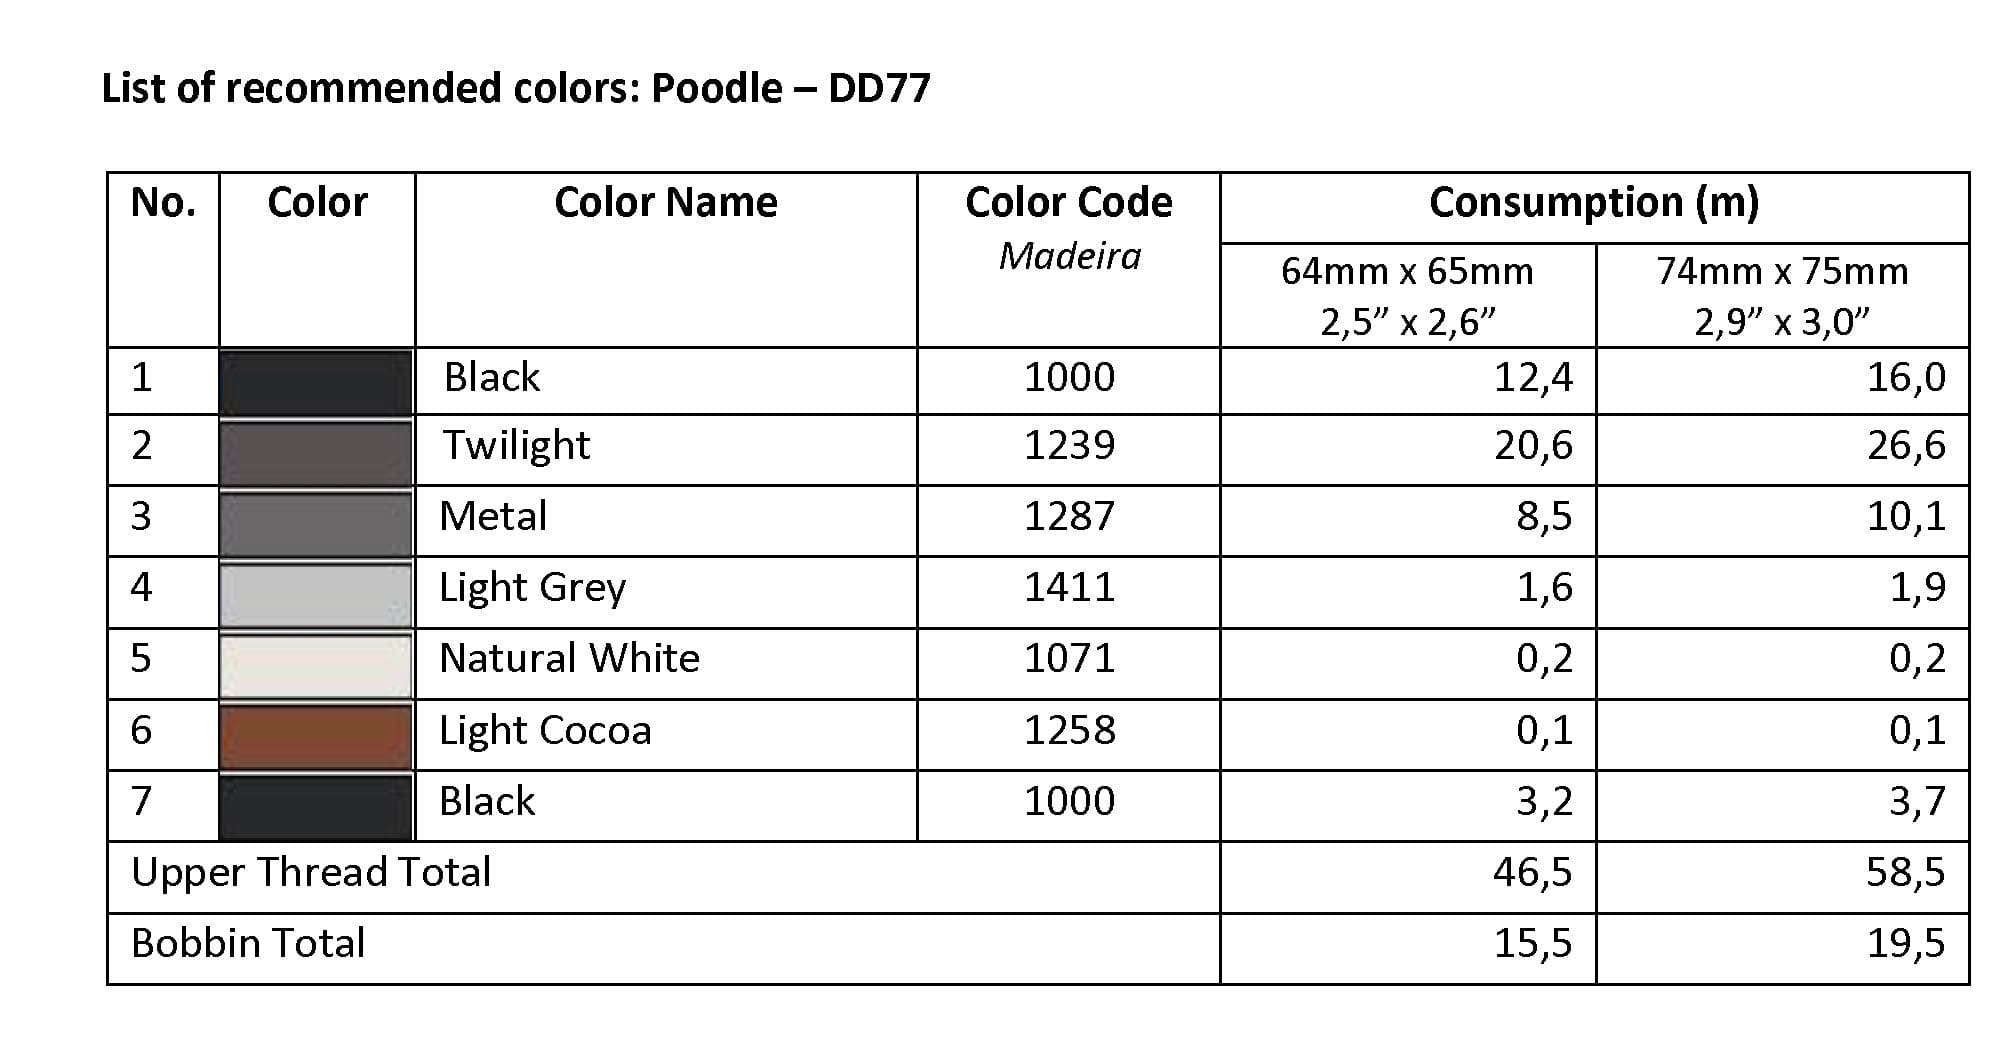 List of Recommended Colors -  Poodle DD77